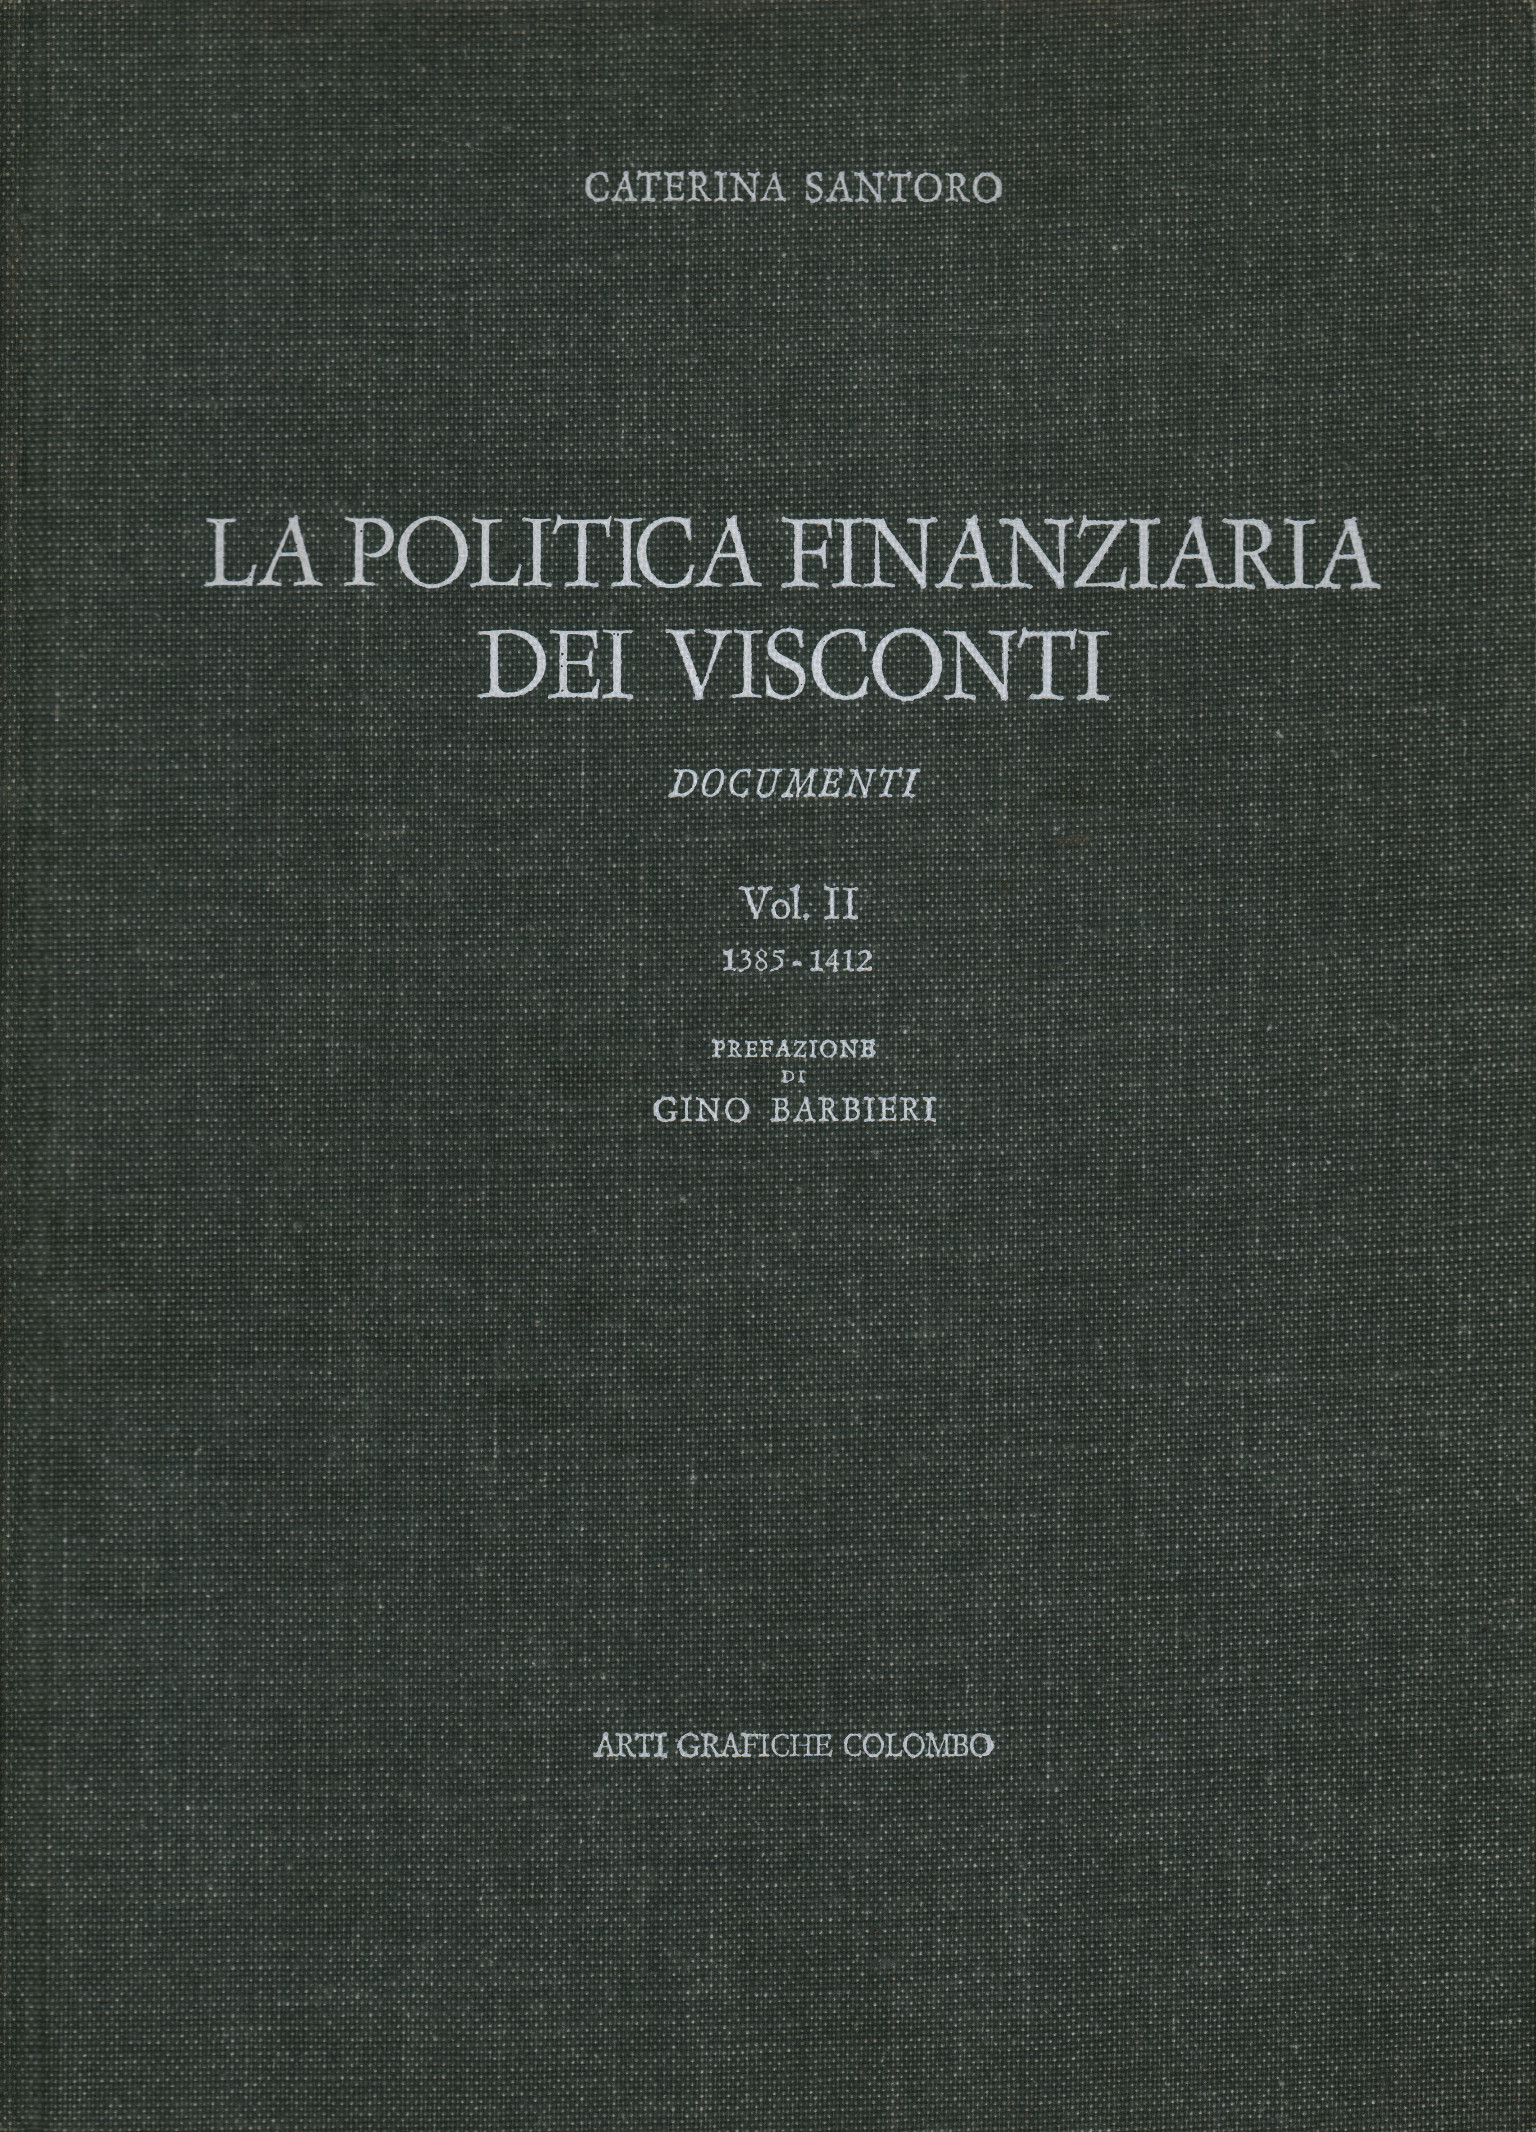 The financial policy of the Visconti (Vo